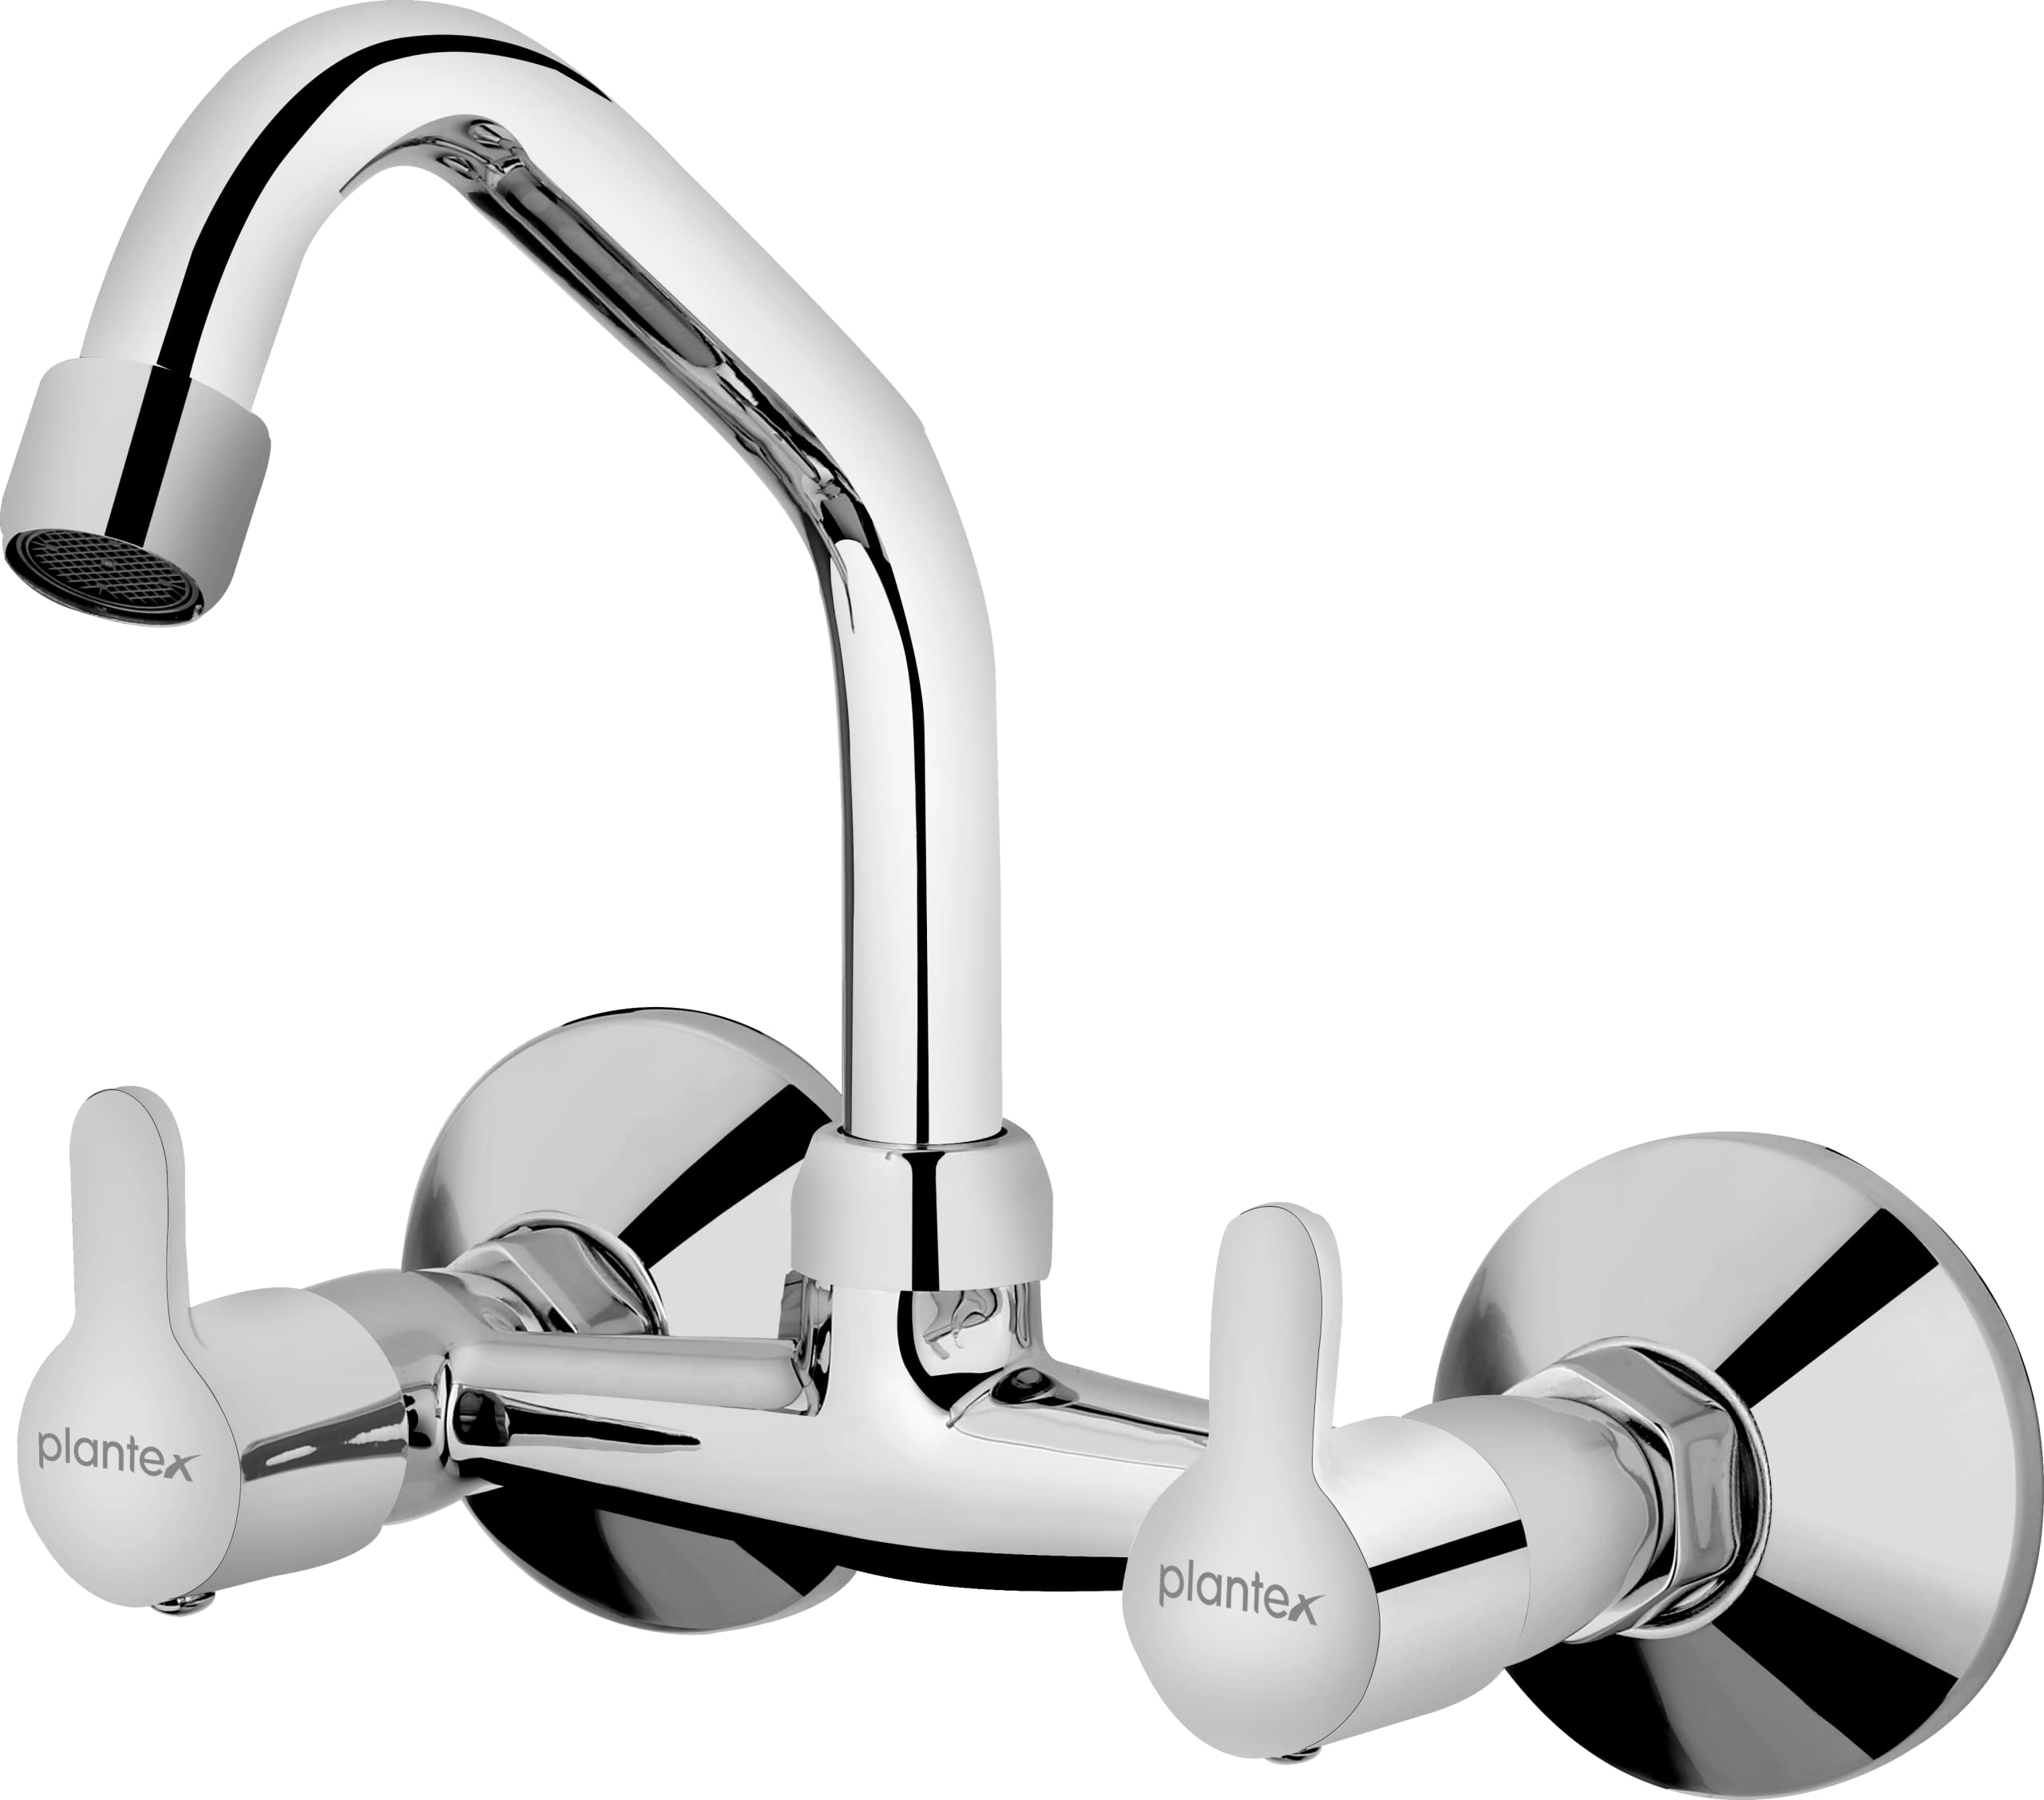 Plantex Pure Brass FLO-814 Sink Mixer with (High Arch 360 Degree) Double Handle Hot & Cold Water Tap for Bathroom/Basin Faucet Tap/Kitchen Sink Tap With Brass Wall Flange & Teflon Tape (Mirror-Chrome Finish)